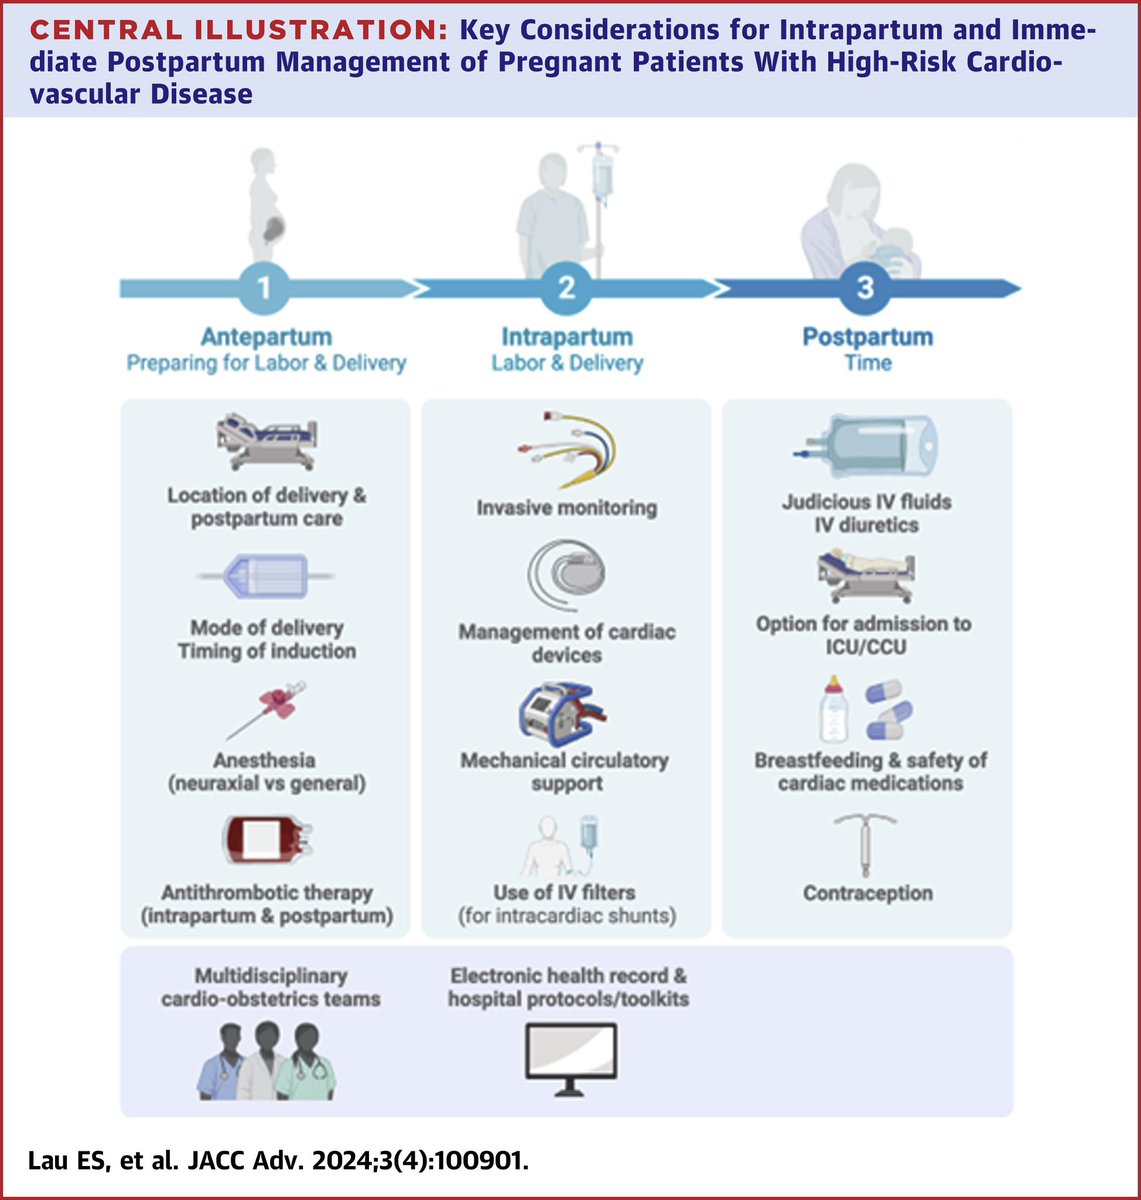 Recommendations for Management of High-Risk Cardiac Delivery: @ACCinTouch CVD in Women Committee Panel #CardioObstetrics @JACCJournals @emilyswlau @NitiCardio @md_harrington @DrKLindley @IsabelleMalhame @drladyheart @OdaymeMD @NanditaScottMD sciencedirect.com/science/articl…